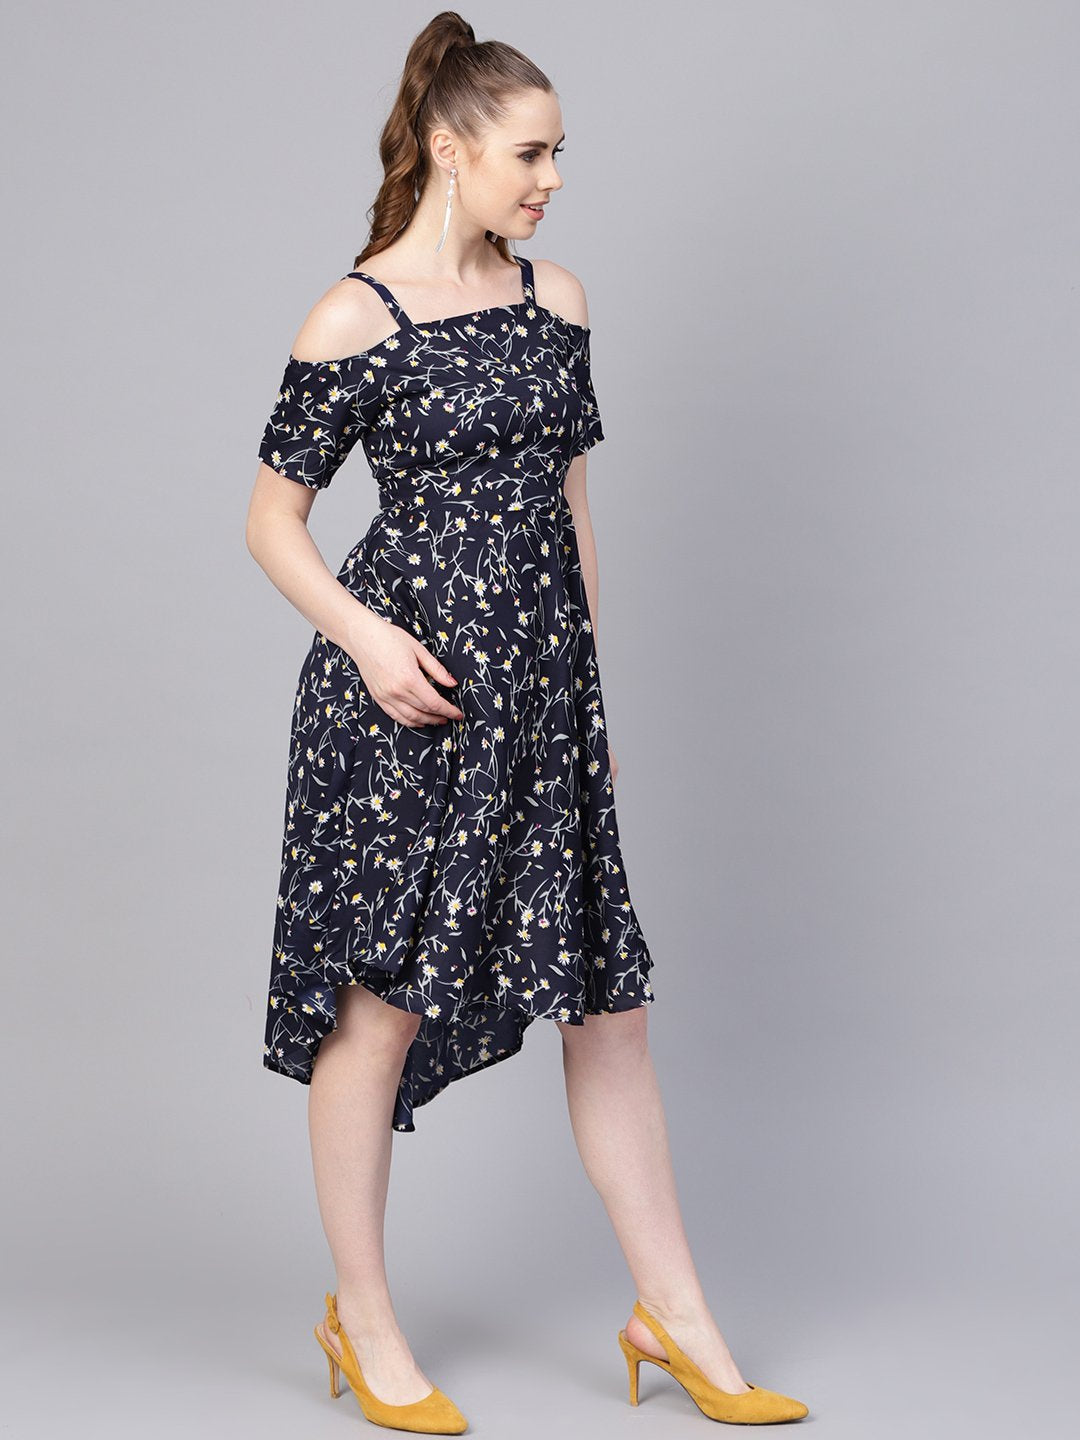 Women's Navy Blue Floral Printed Dress With Shoulder Strap & Detailed Sleeves - Nayo Clothing